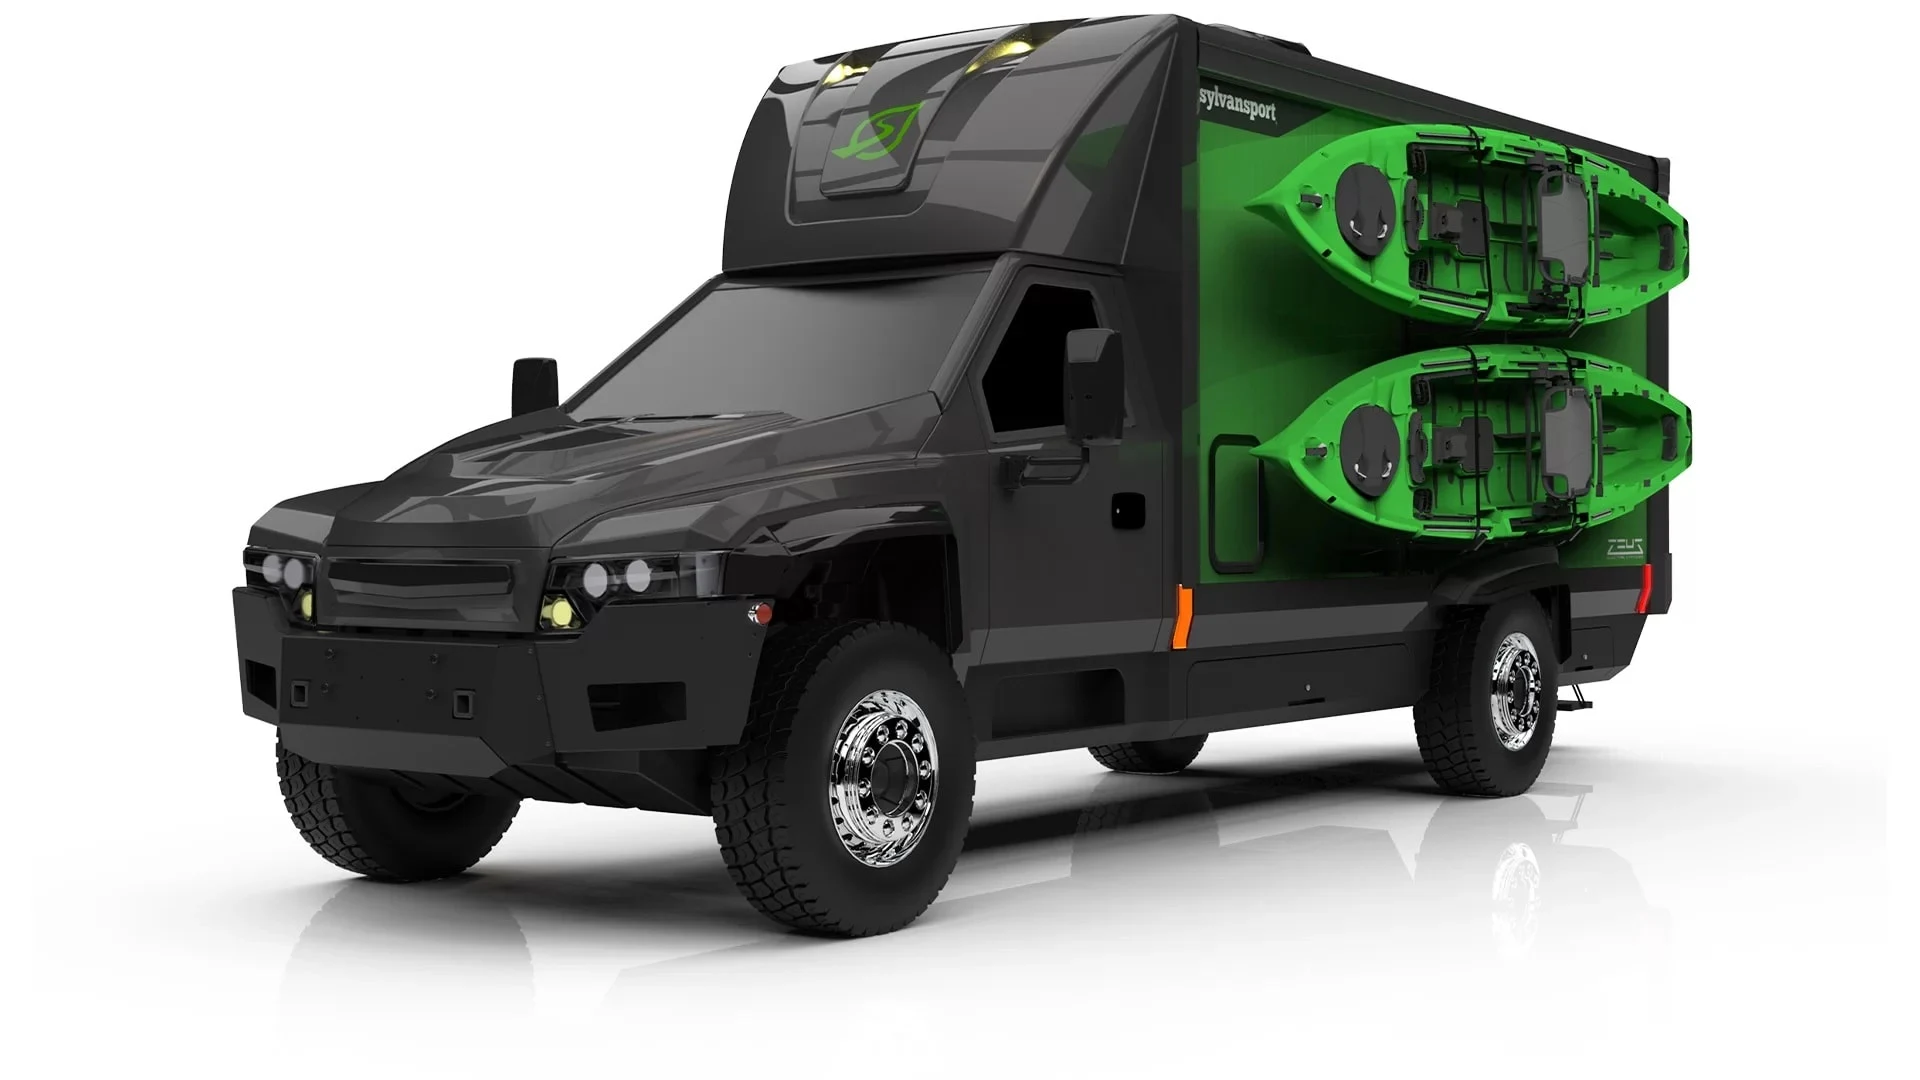 Photo of SylvanSport's concept for a rugged all-electric RV